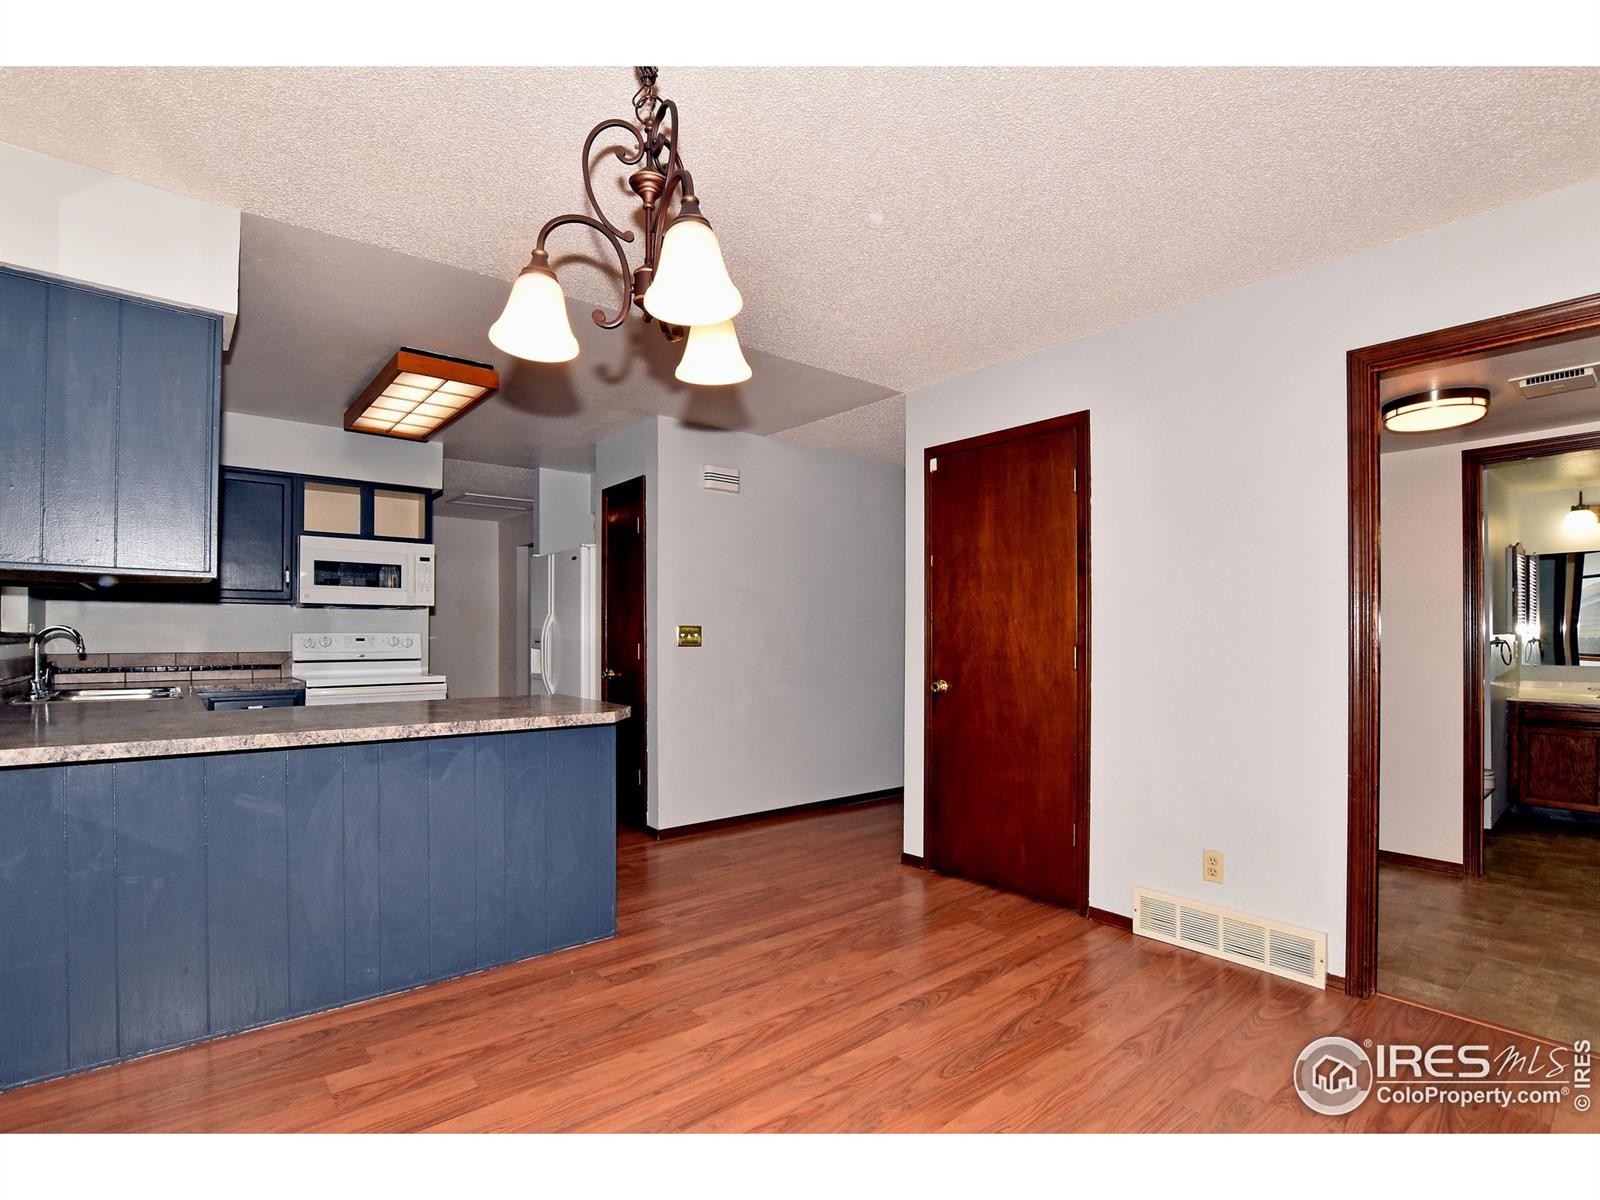 4103 13th, Greeley, CO